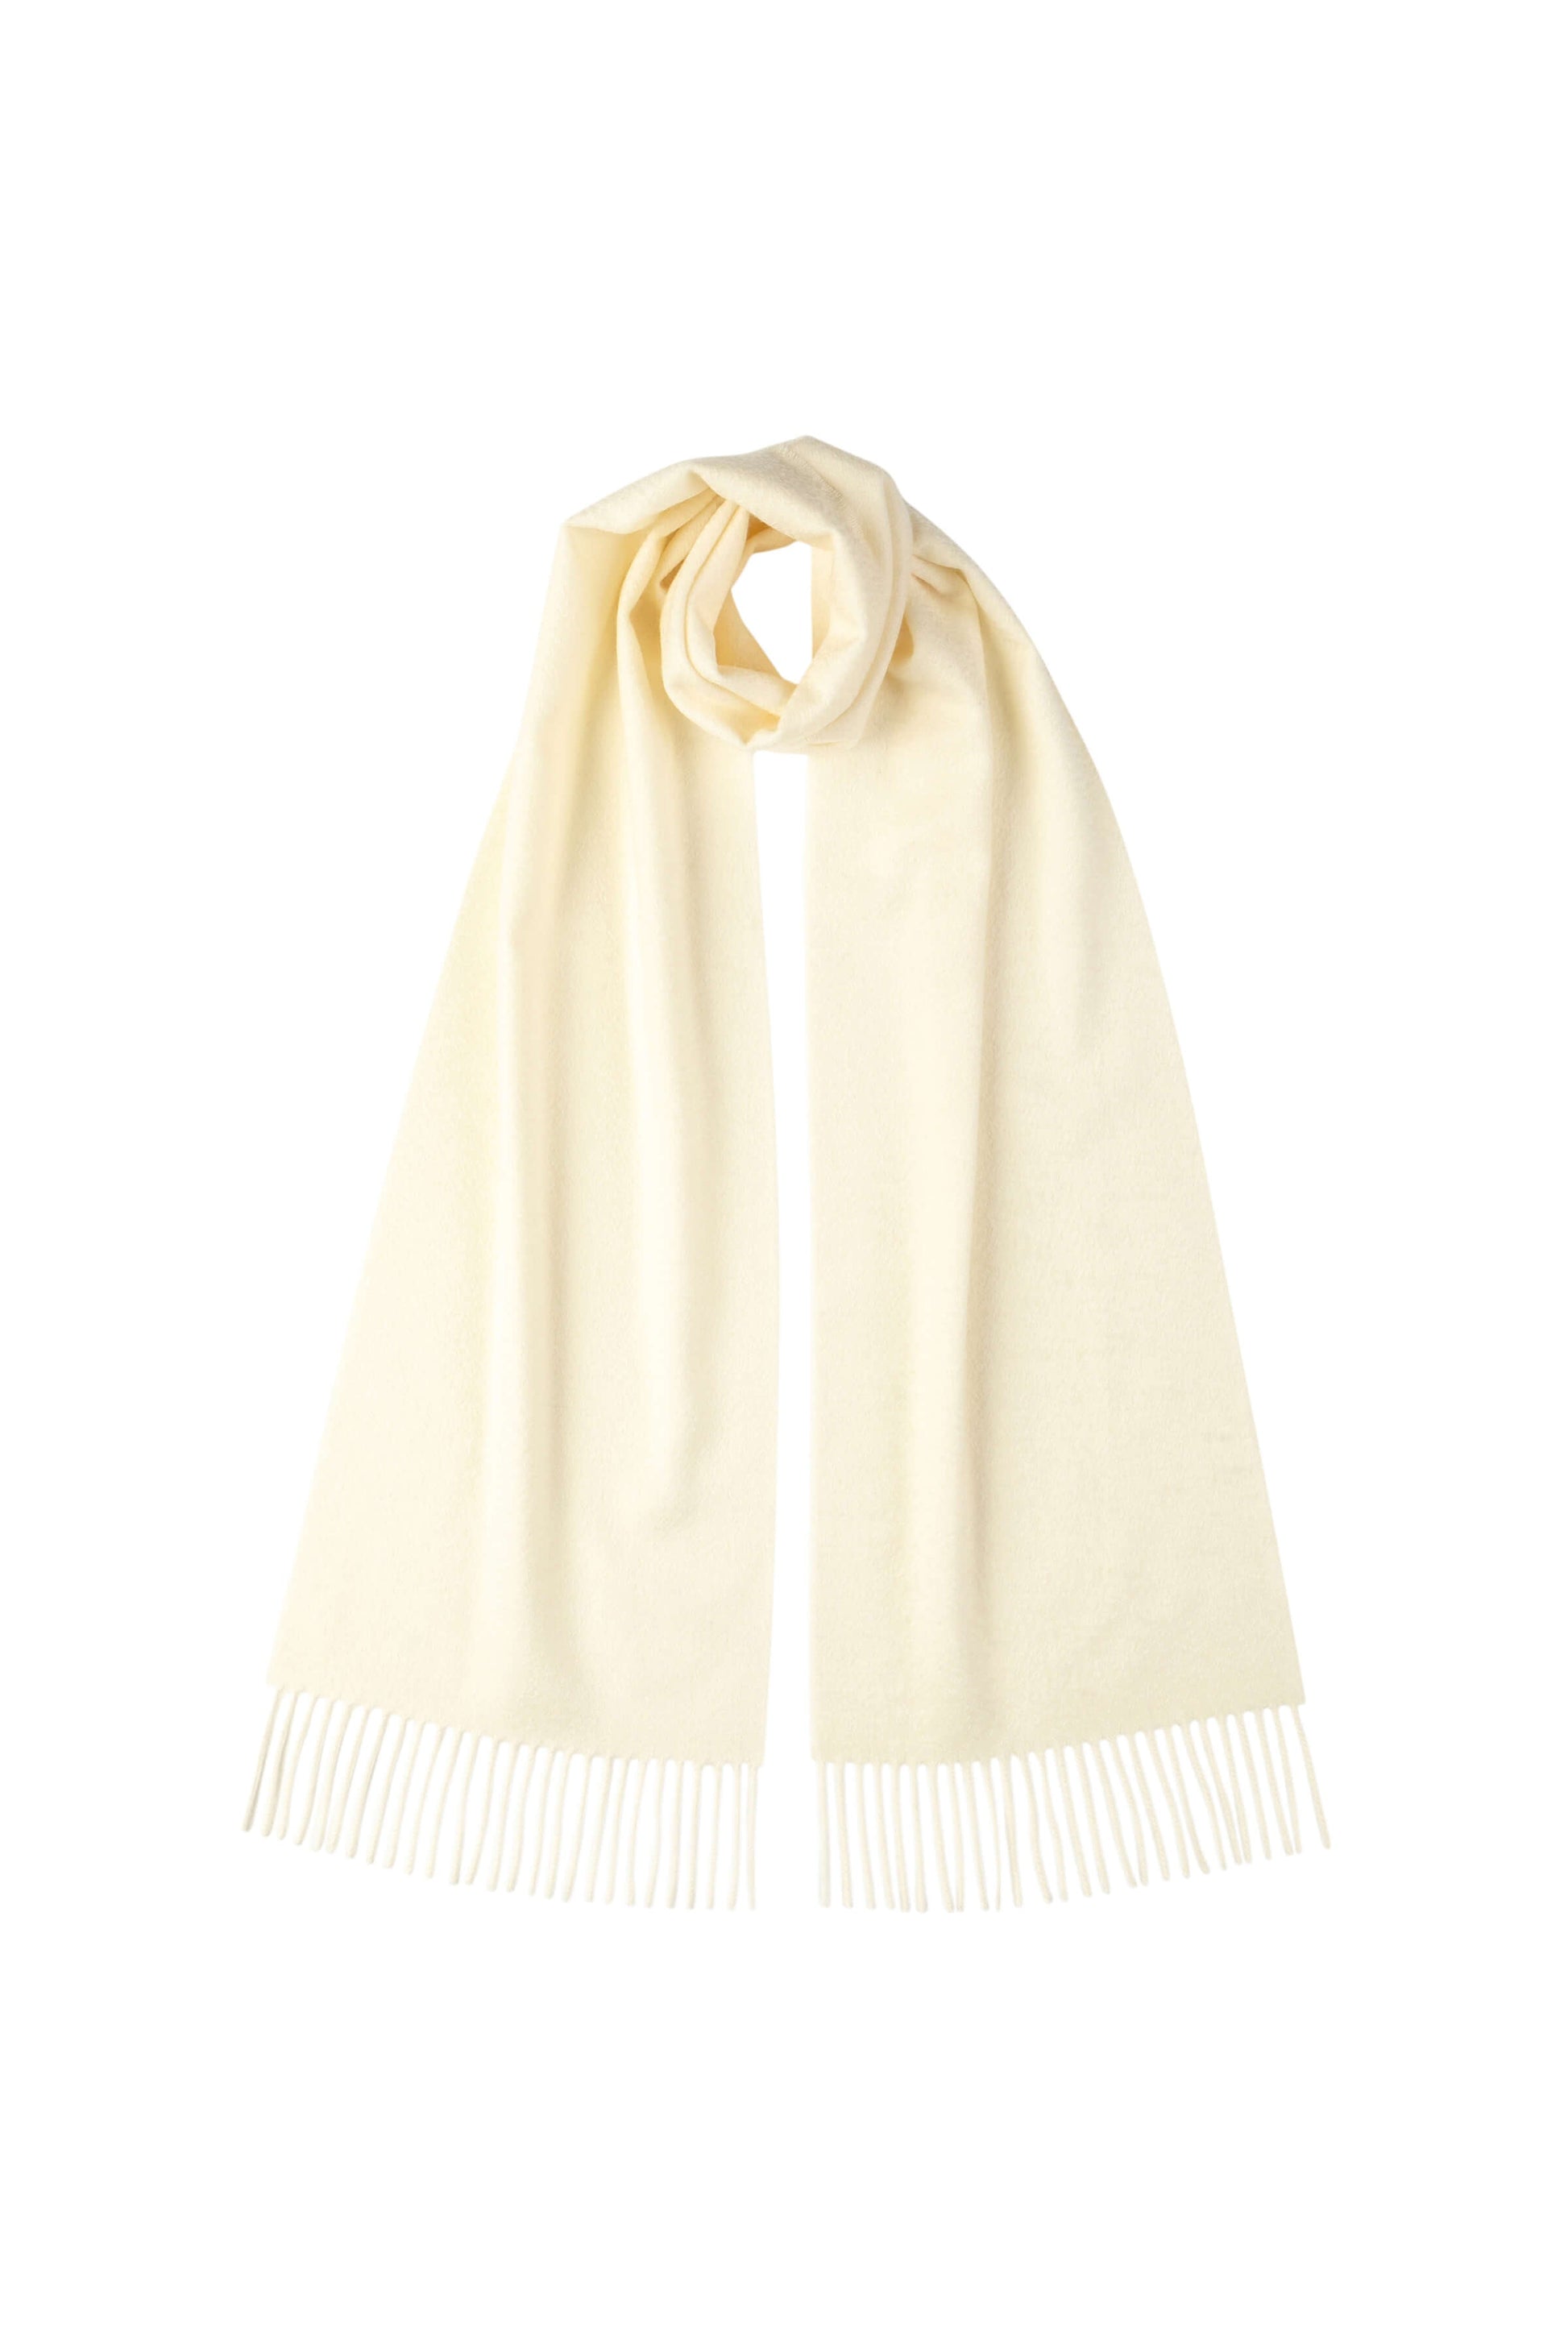 Johnstons of Elgin Cashmere Scarf in White on a white background WA000016SA0000ONE